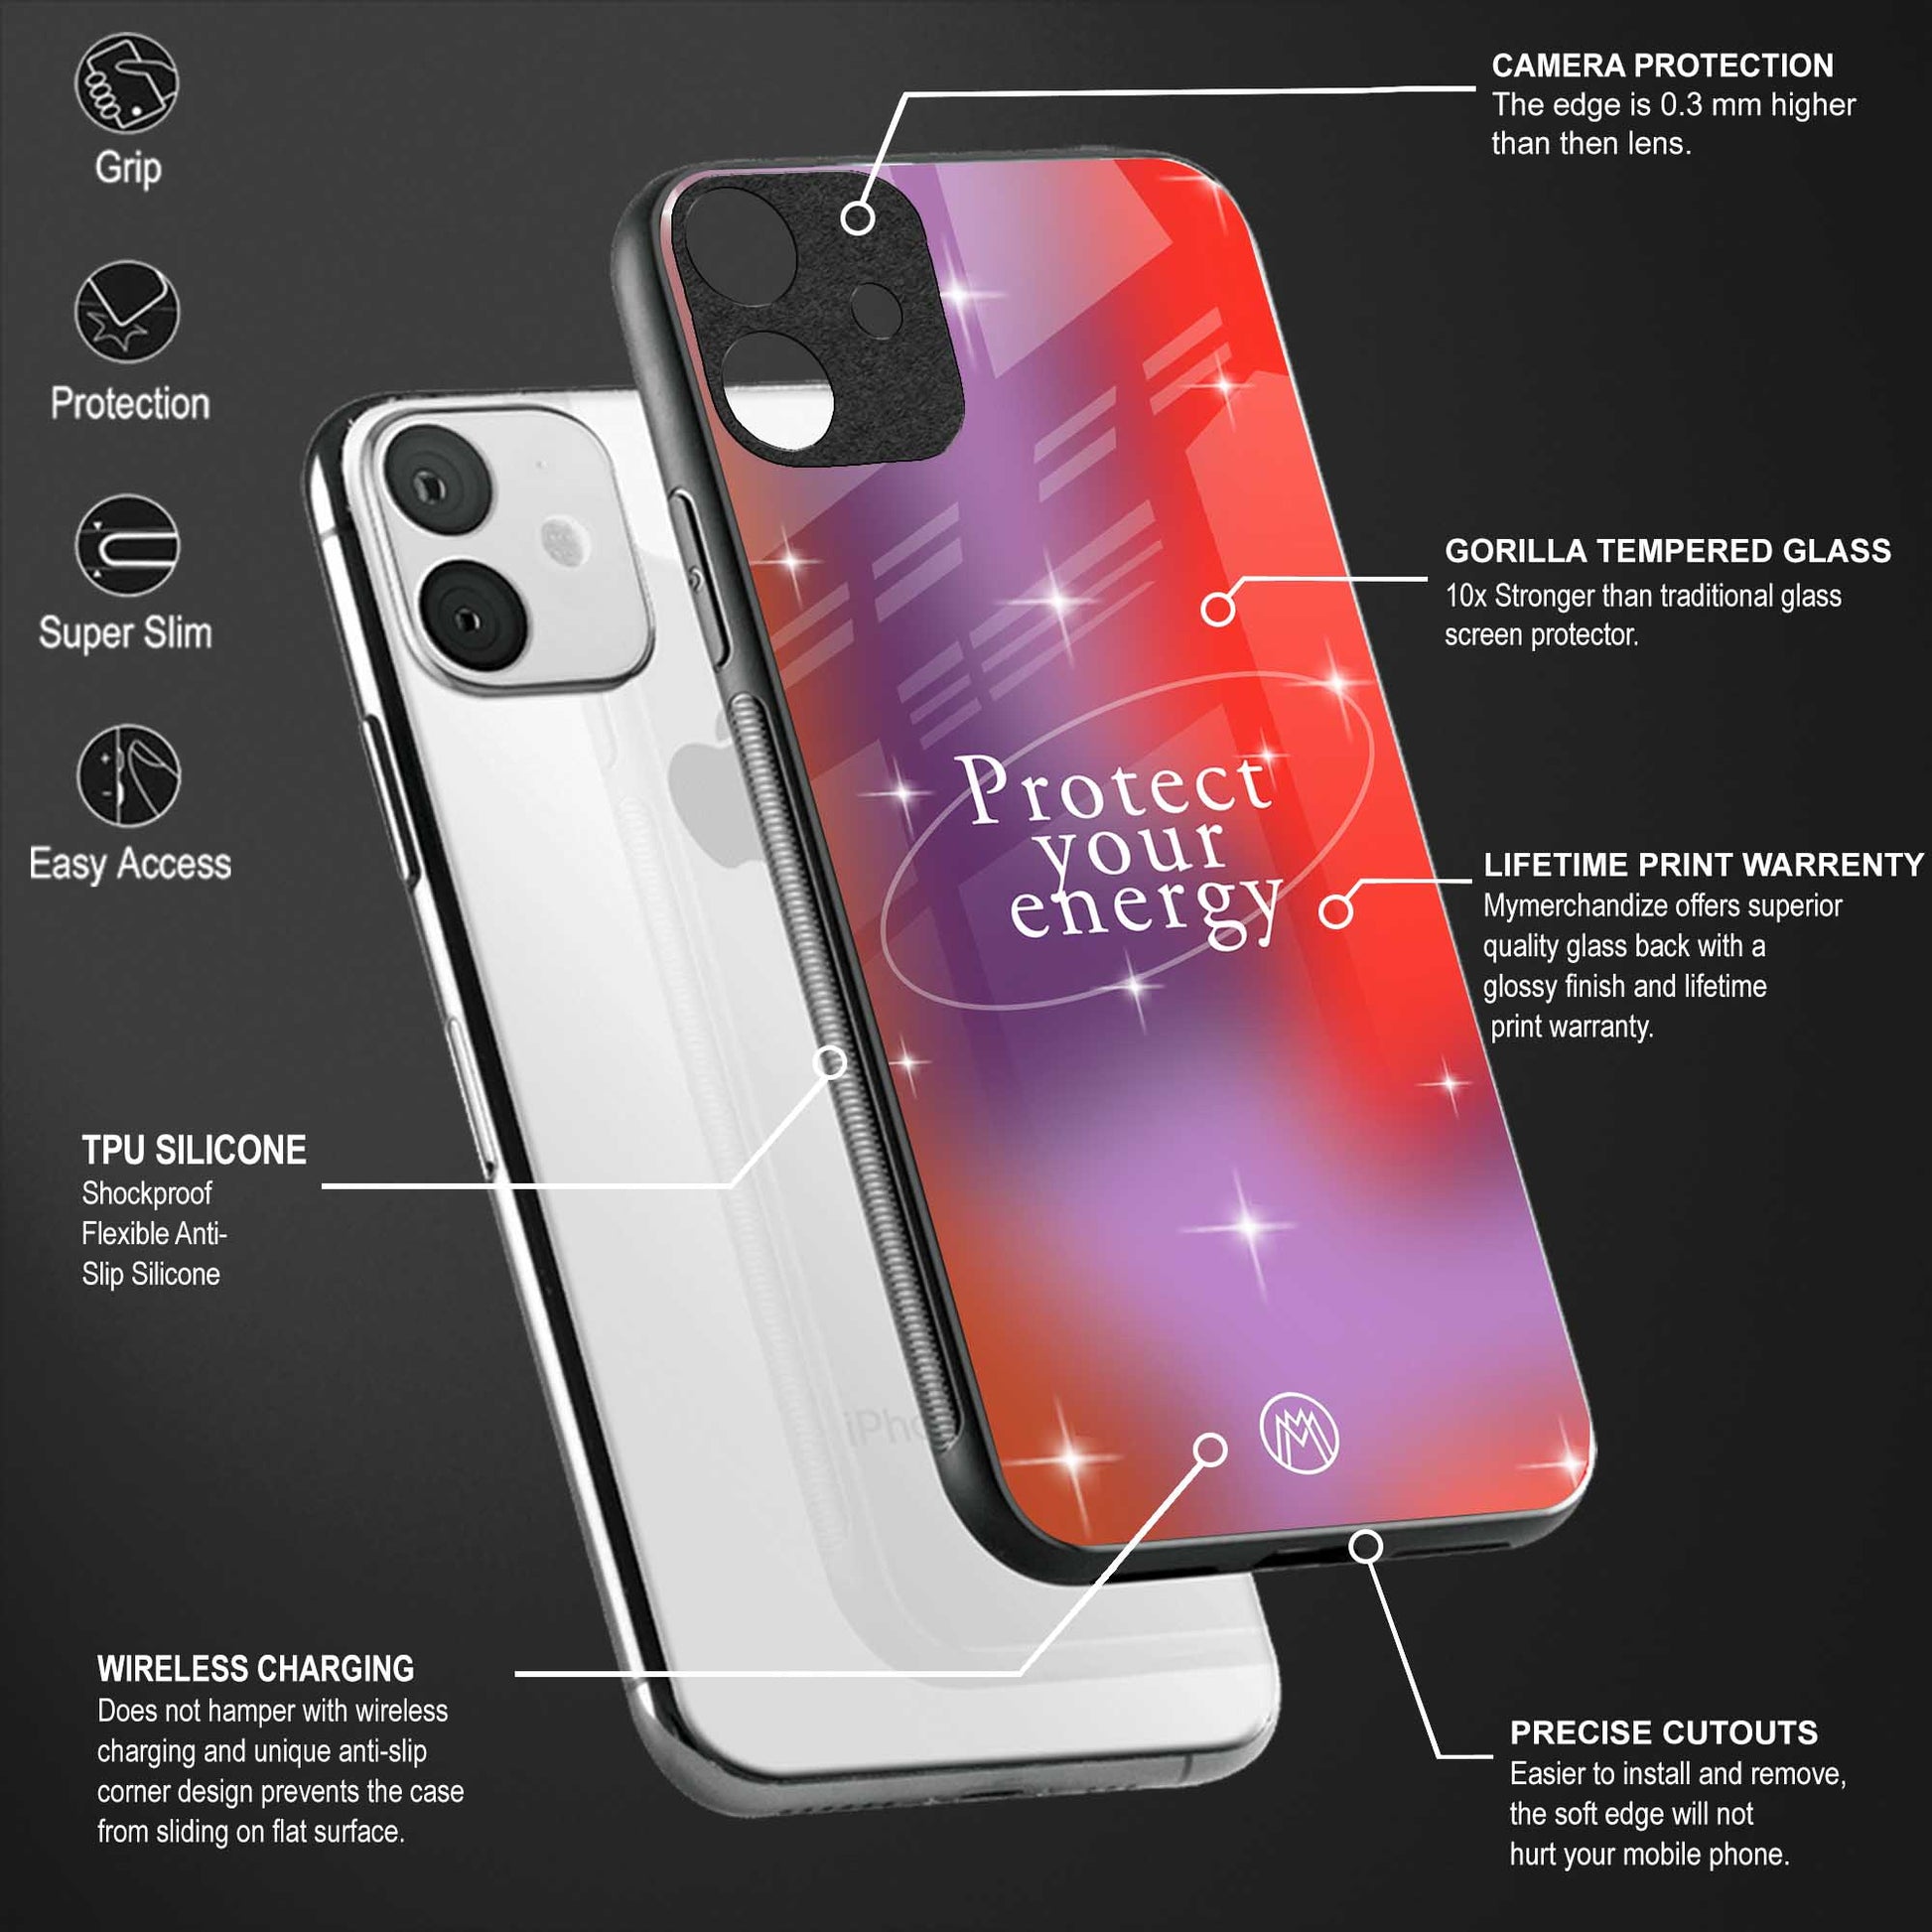 protect your energy back phone cover | glass case for vivo y73